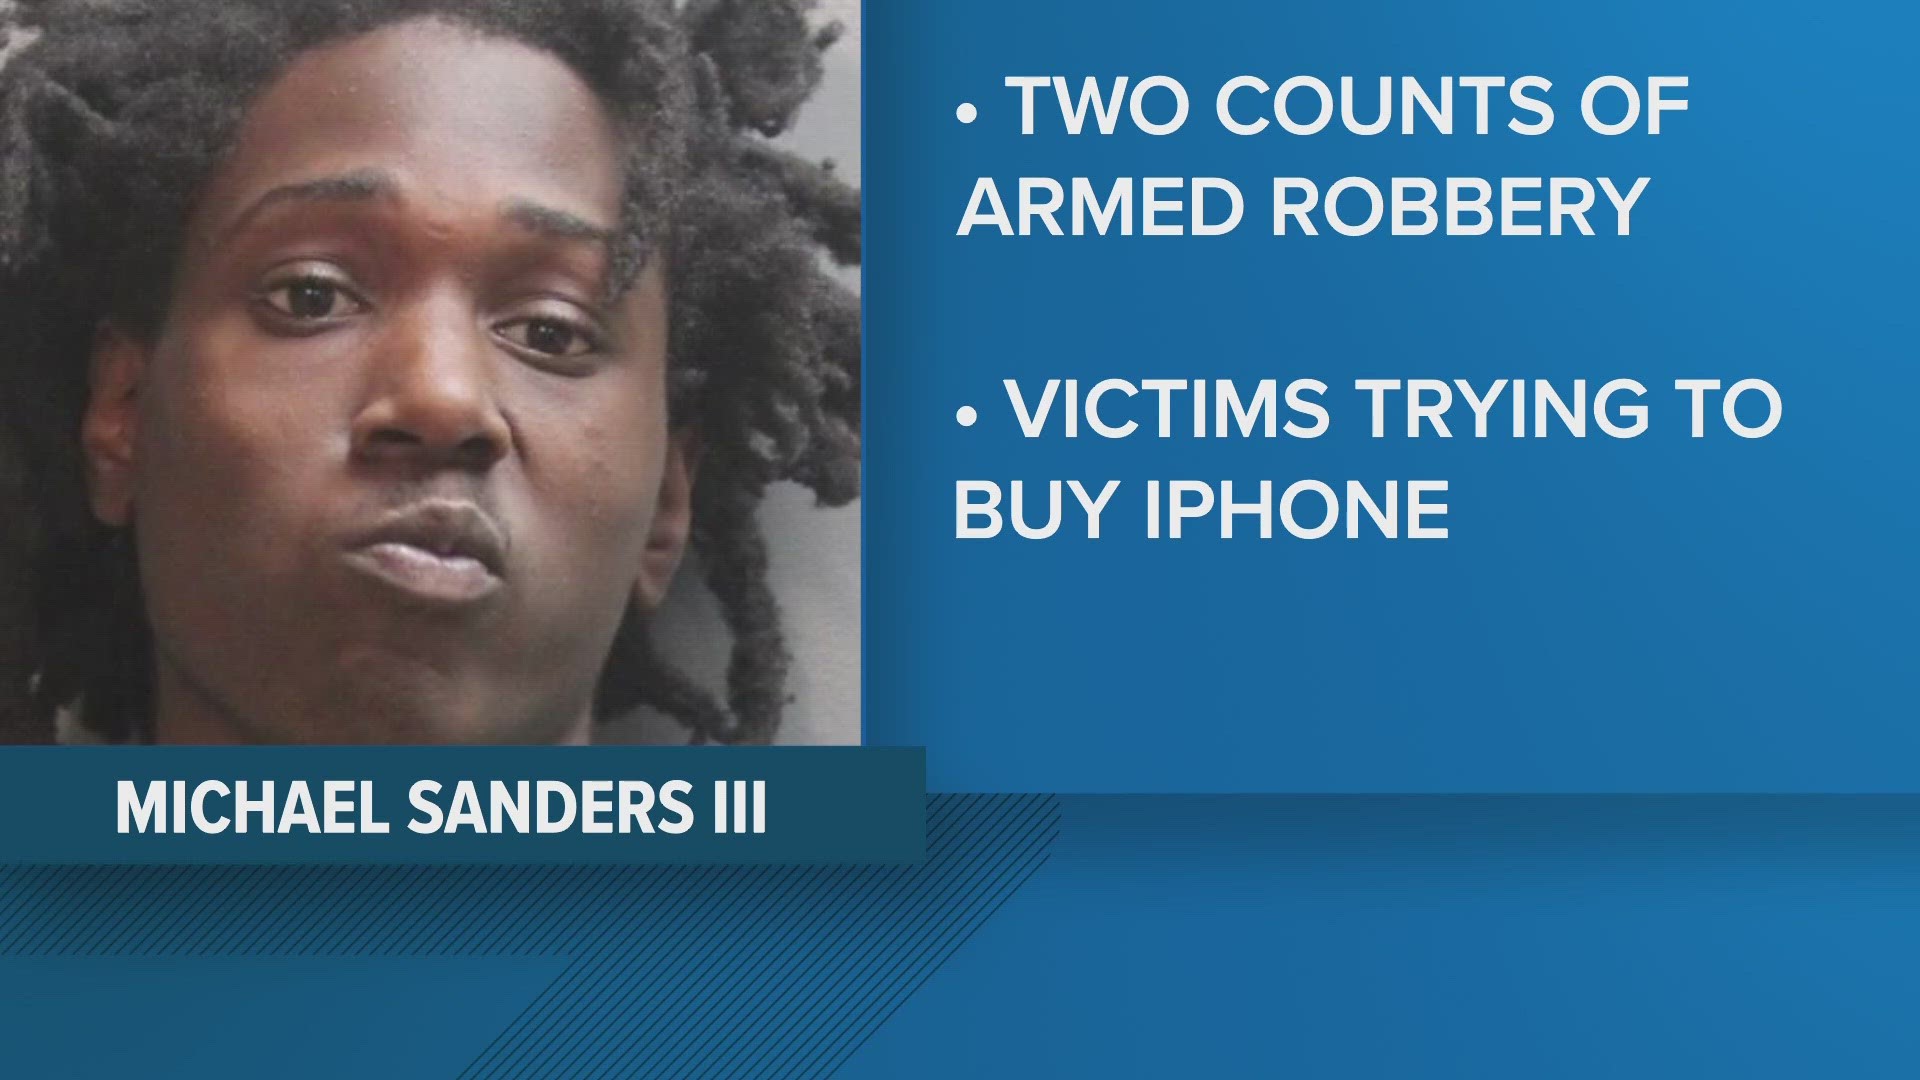 Michael Sanders III, 18, arrested on two armed robbery charges.